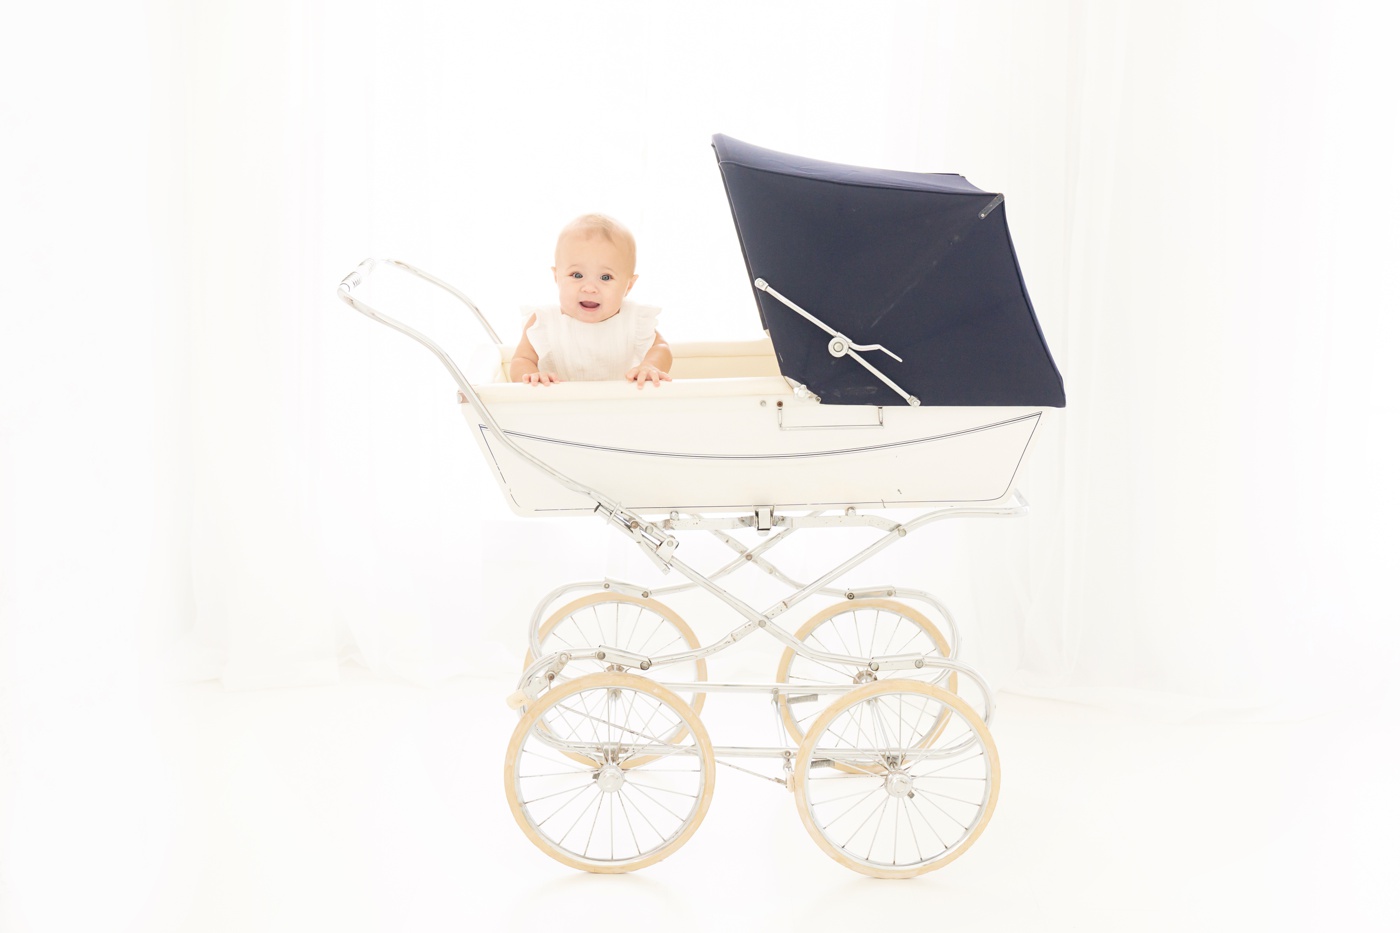 baby and antique vintage white pram being photographed in a white photography studio